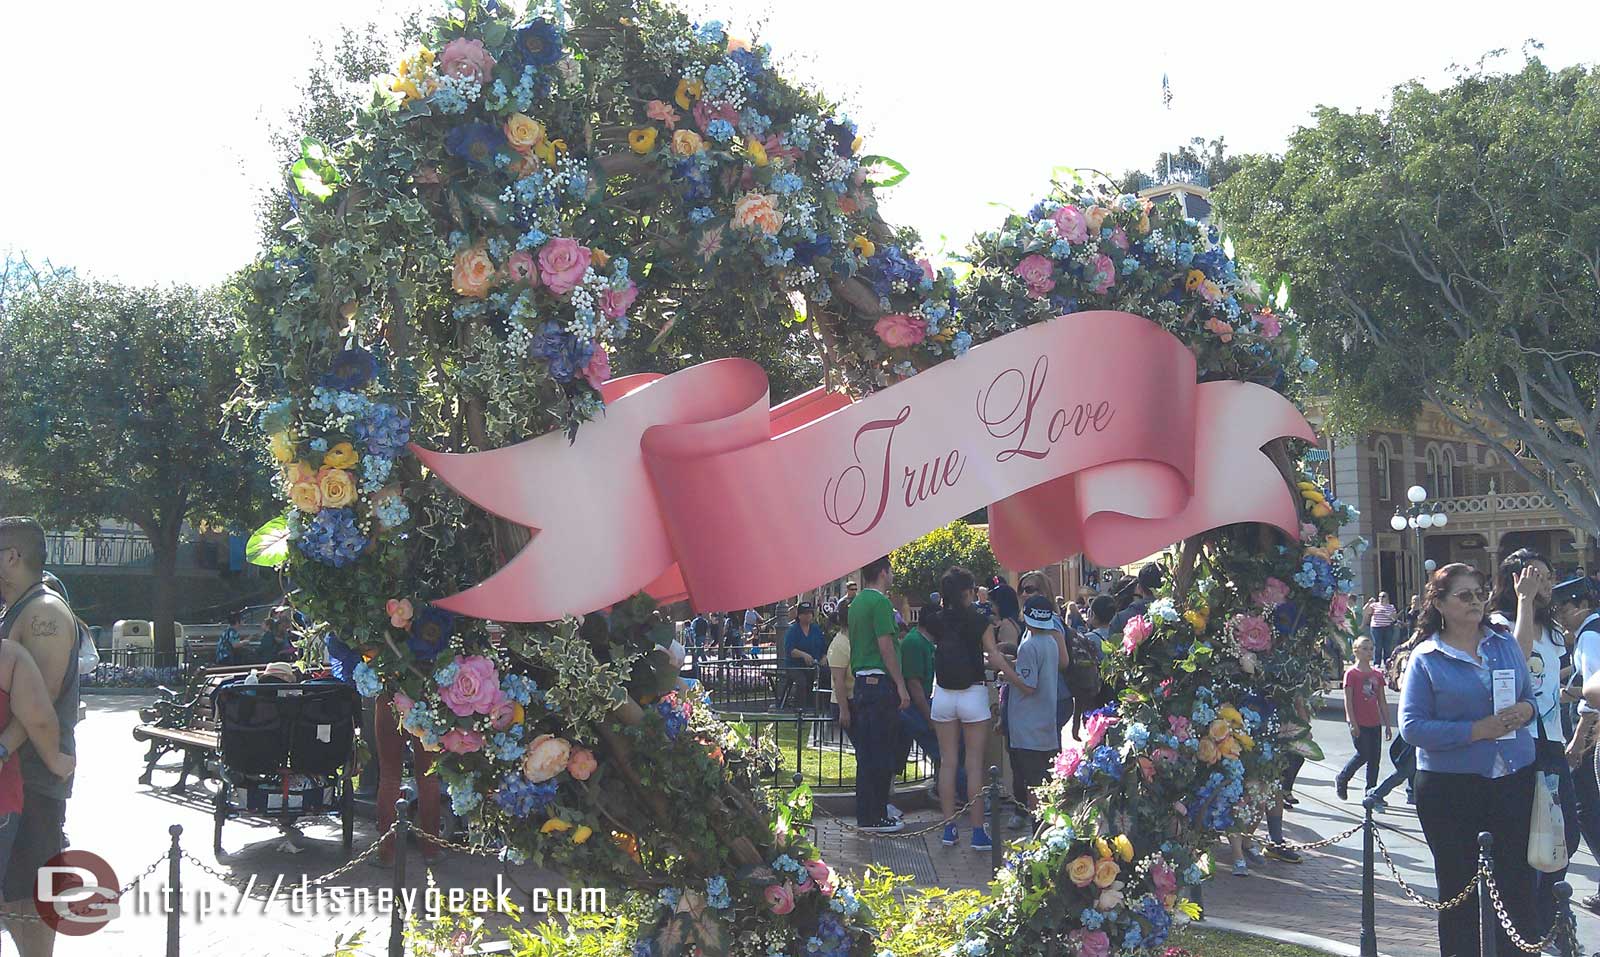 True Love Week is going on with photo ops on Main Street LimitedTimeMagic